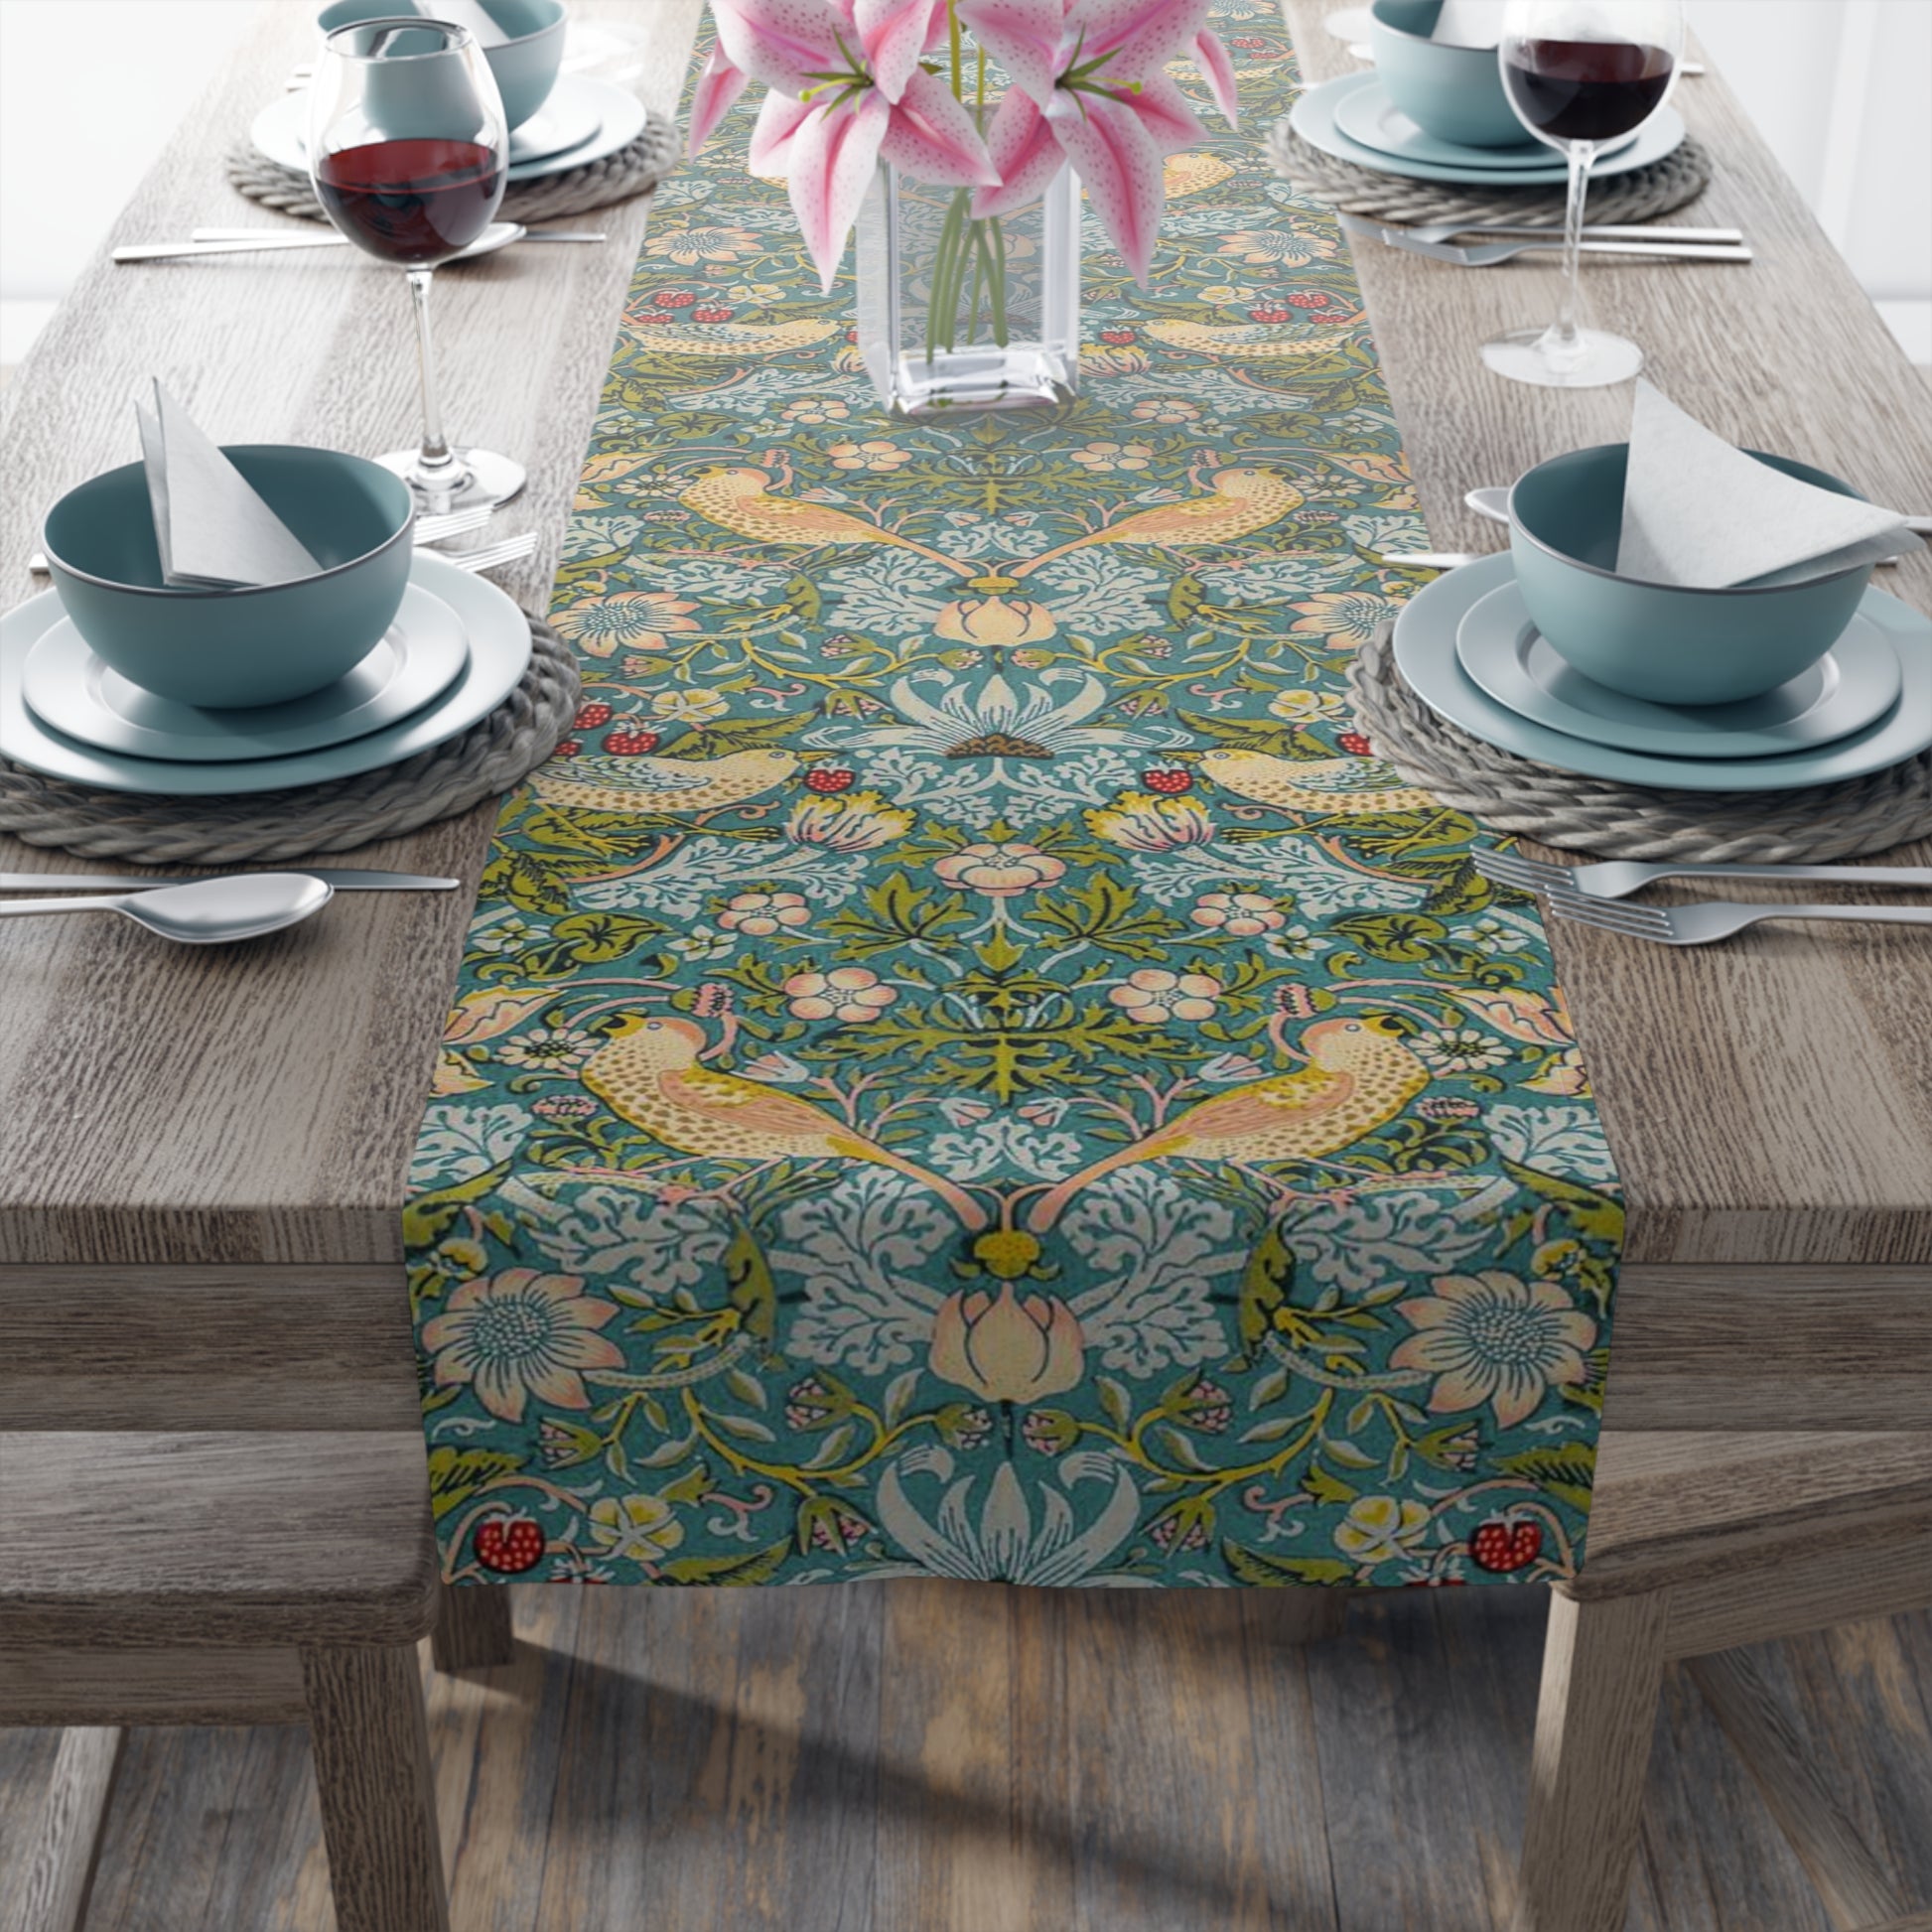 william-morris-co-table-runner-strawberry-thief-collection-duck-egg-blue-4